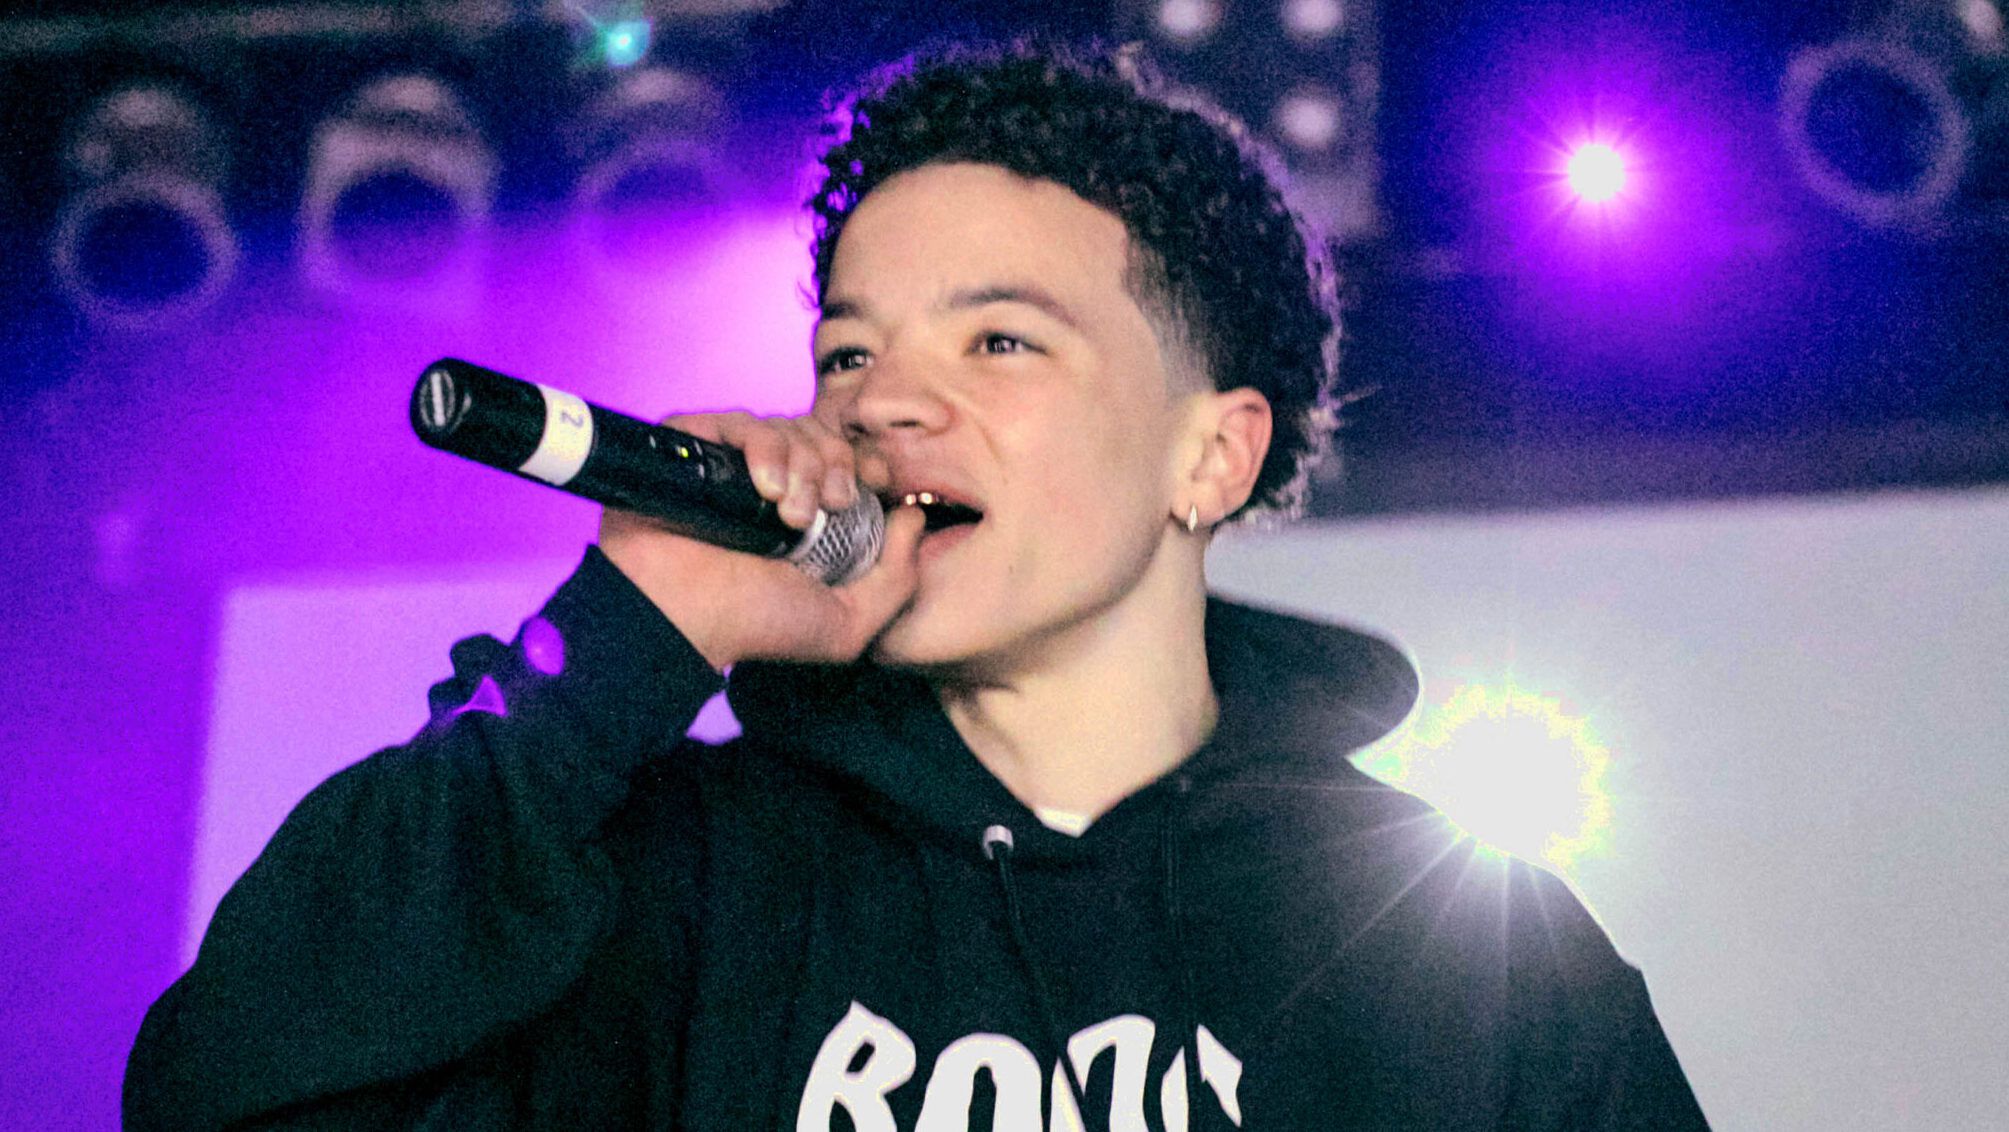 Lil Mosey’s Rape Case Defense Suffers Blow, Rapper Could Face Life in Prison if Convicted